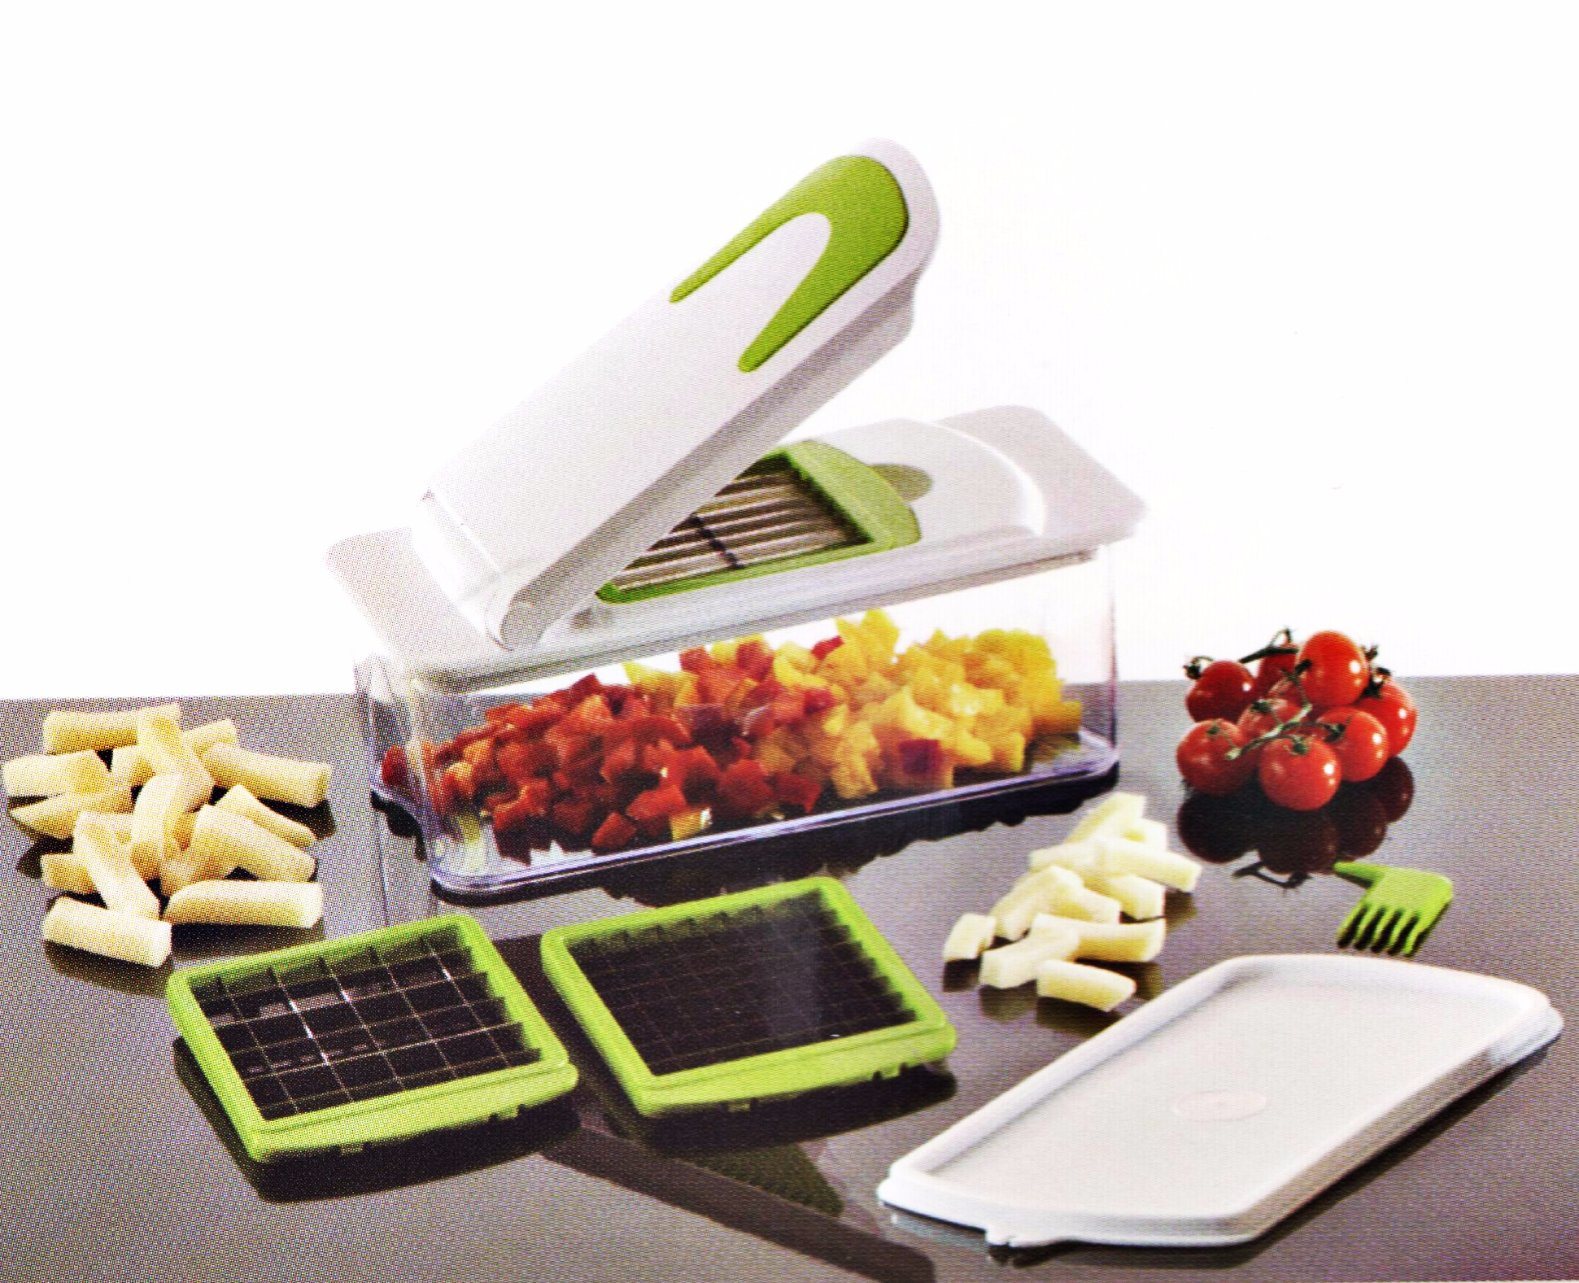 3 in 1 Plastic Vegetable Cutting Food Chopper Dice and Slice Machine Cg078